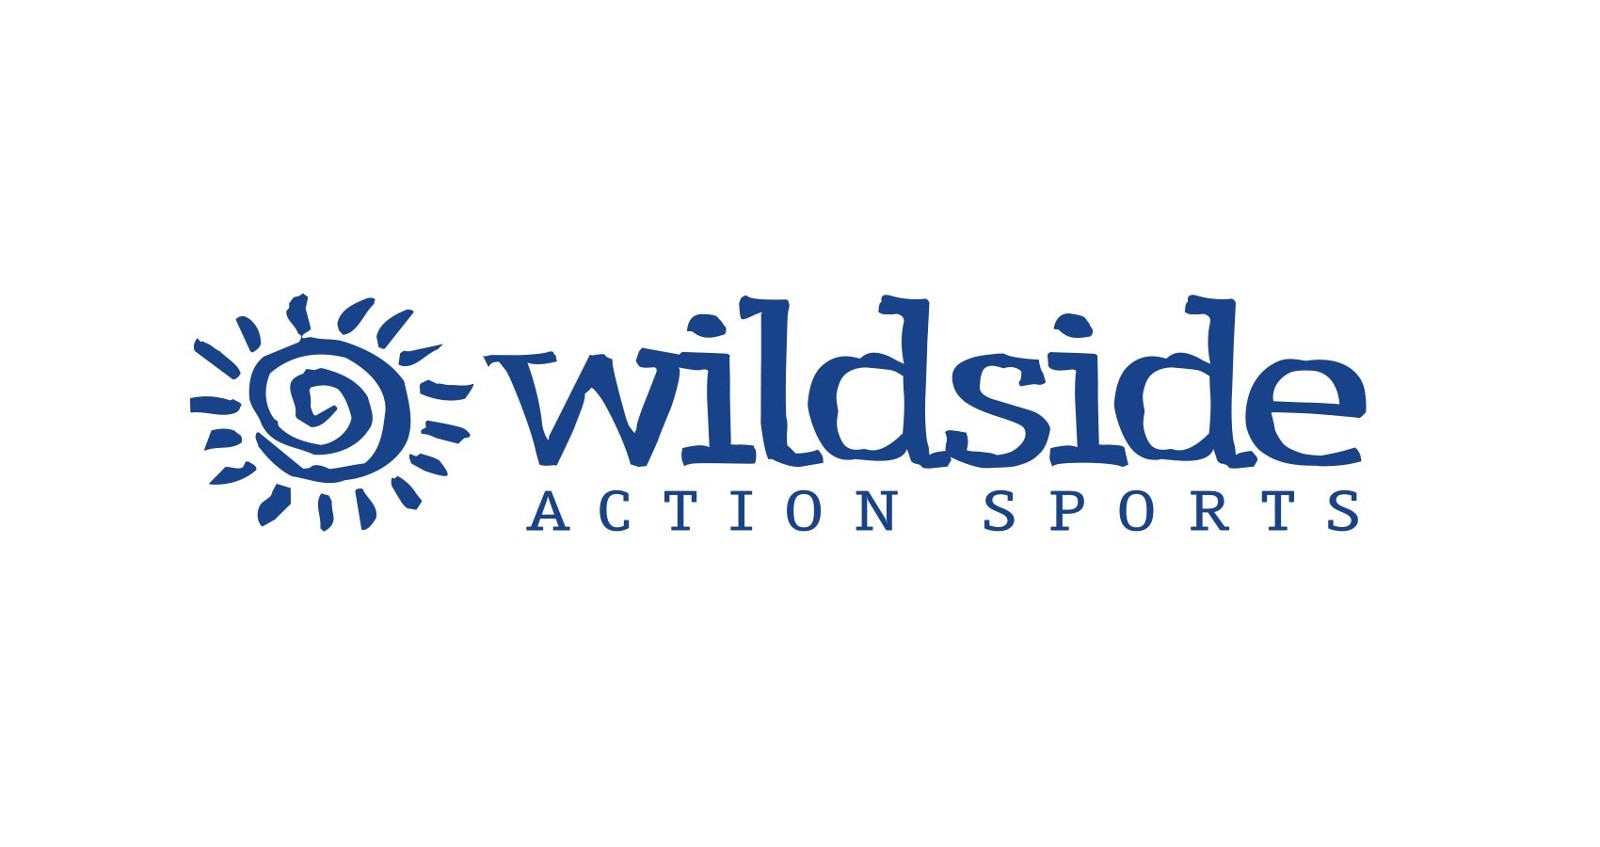 Wildside Action Sports